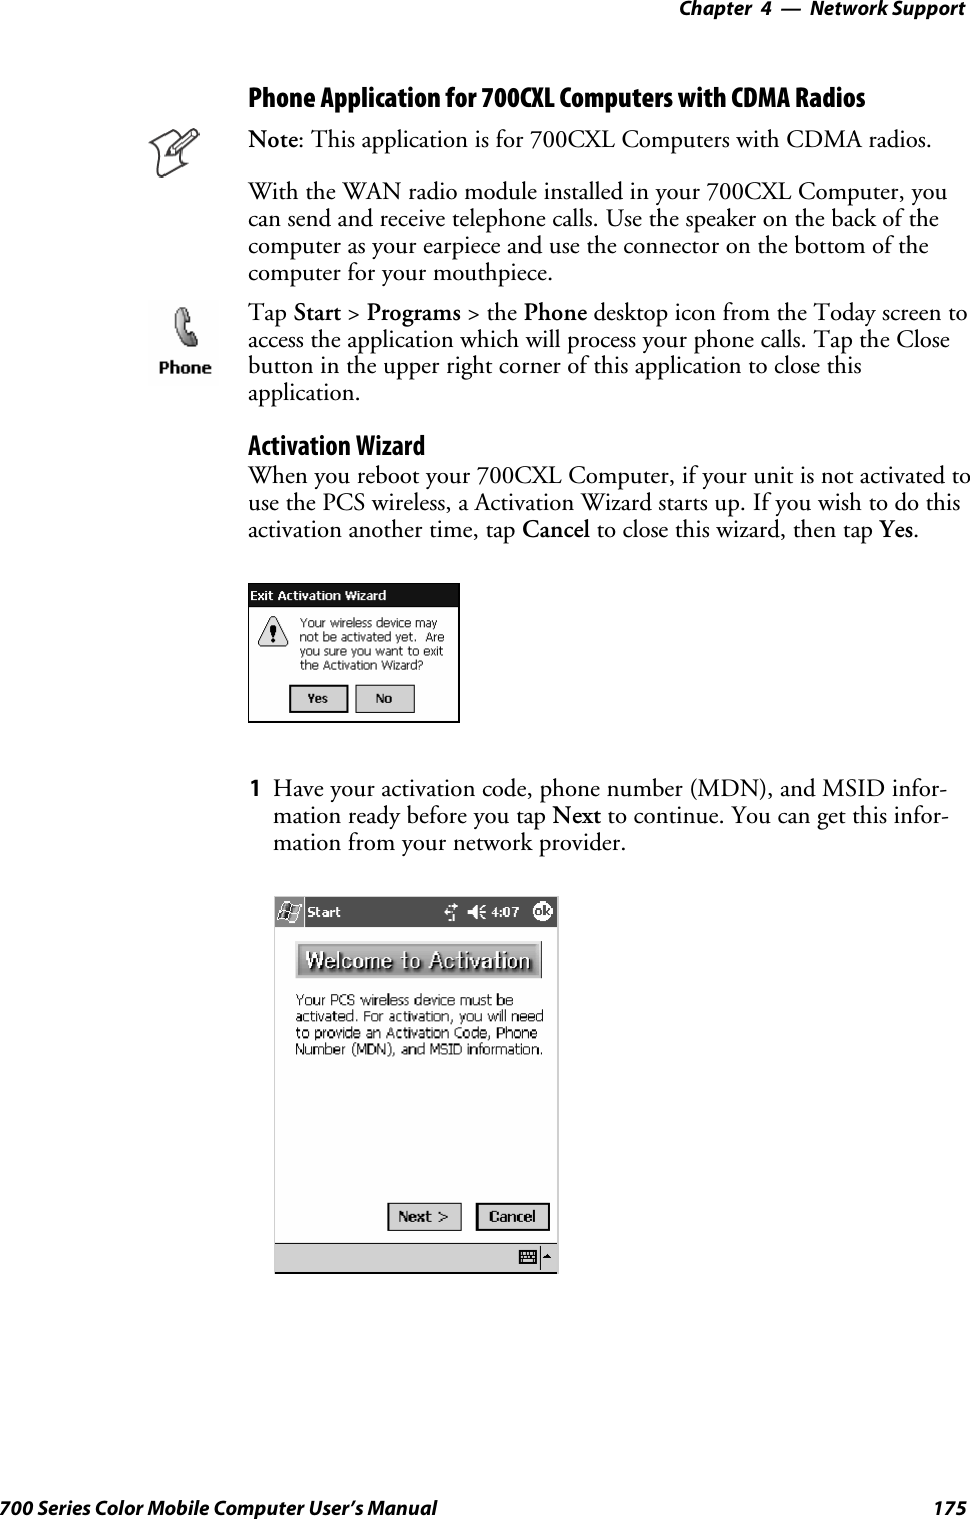 Network Support—Chapter 4175700 Series Color Mobile Computer User’s ManualPhone Application for 700CXL Computers with CDMA RadiosNote: This application is for 700CXL Computers with CDMA radios.With the WAN radio module installed in your 700CXL Computer, youcan send and receive telephone calls. Use the speaker on the back of thecomputer as your earpiece and use the connector on the bottom of thecomputer for your mouthpiece.Tap Start &gt;Programs &gt;thePhone desktop icon from the Today screen toaccess the application which will process your phone calls. Tap the Closebutton in the upper right corner of this application to close thisapplication.Activation WizardWhen you reboot your 700CXL Computer, if your unit is not activated touse the PCS wireless, a Activation Wizard starts up. If you wish to do thisactivation another time, tap Cancel to close this wizard, then tap Yes.1Have your activation code, phone number (MDN), and MSID infor-mation ready before you tap Next to continue. You can get this infor-mation from your network provider.